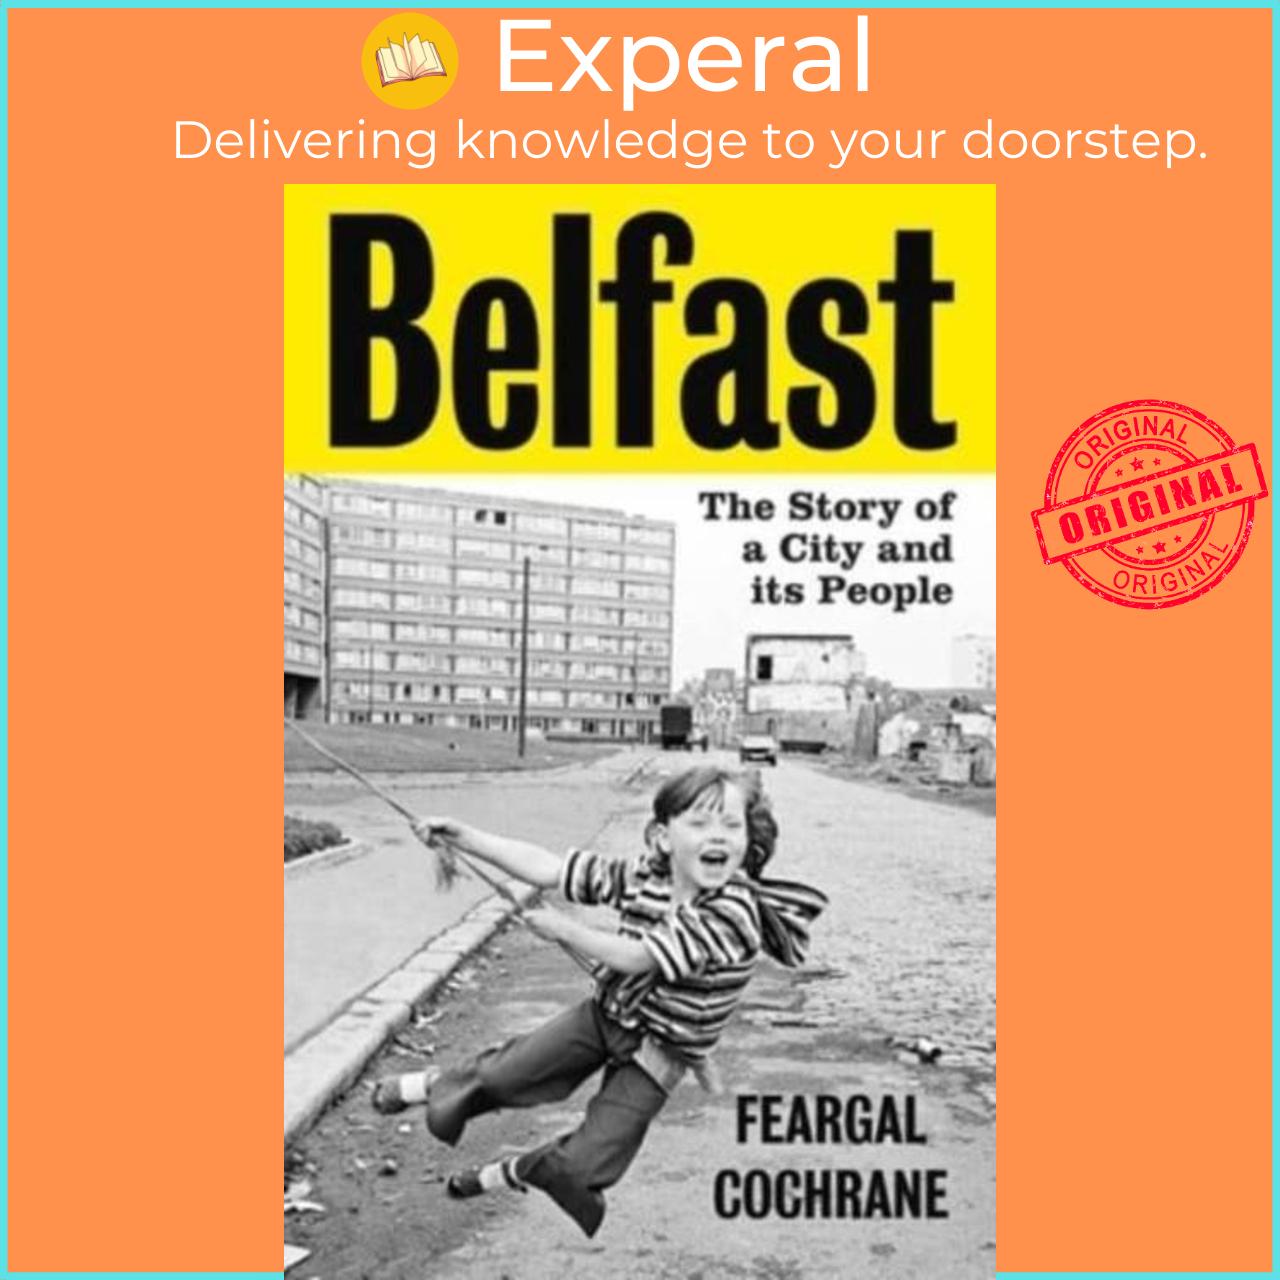 Sách - Belfast - The Story of a City and its People by Feargal Cochrane (UK edition, hardcover)